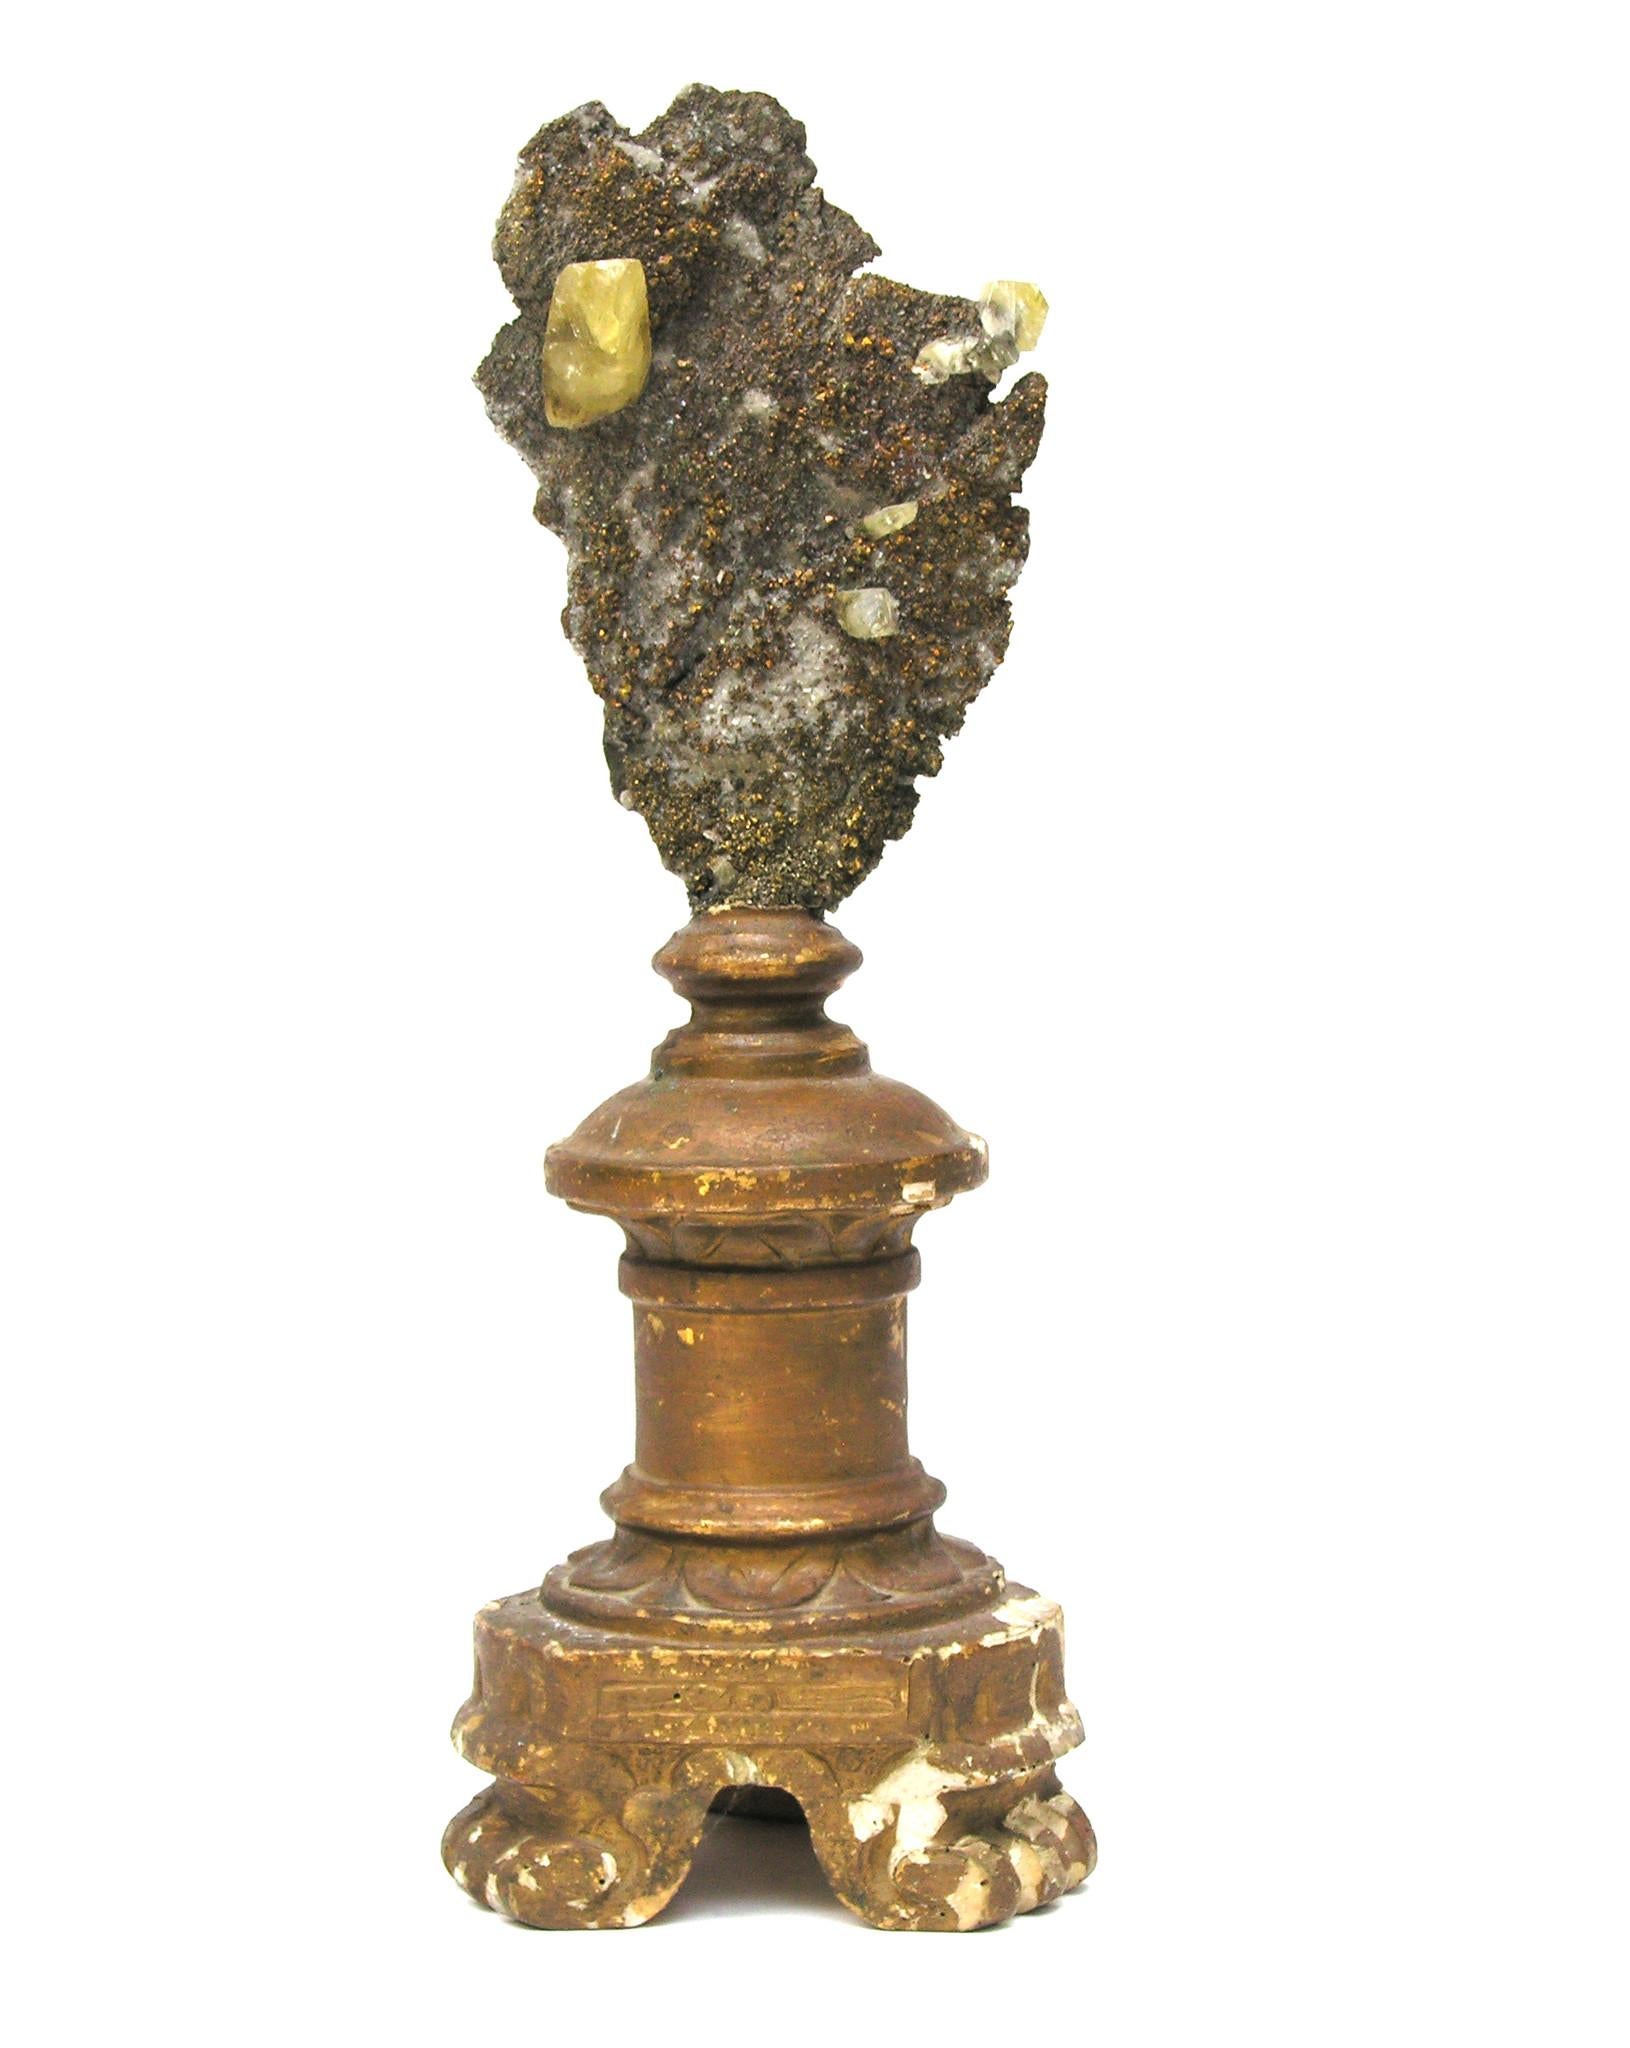 Sculptural 18th century Italian candlestick mounted with chalcopyrite and calcite crystals in matrix.

The gilded fragment was originally part of a candlestick in a historical Italian church in Italy. It is mounted with the coordinating chalcopyrite